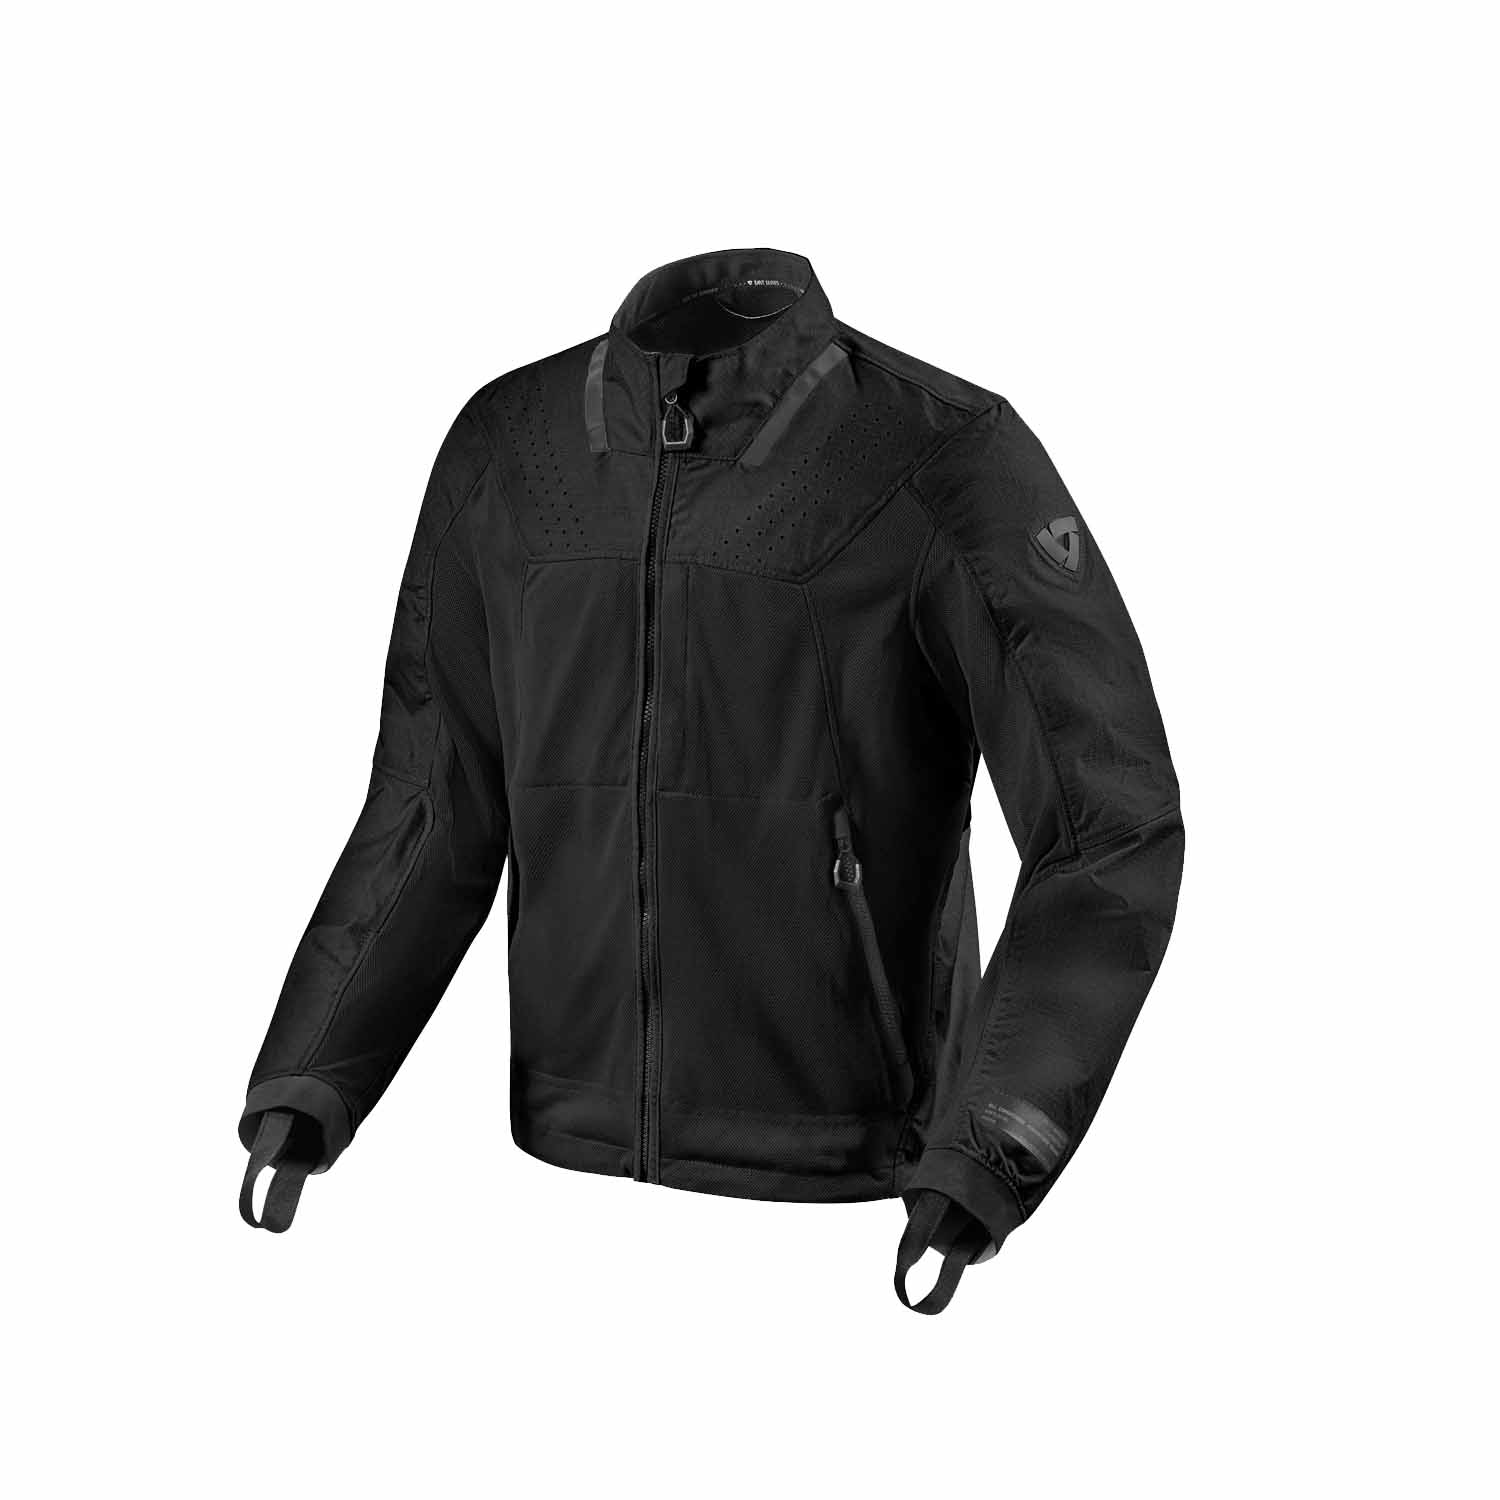 Image of REV'IT! Territory Jacket Black Standard Taille XL